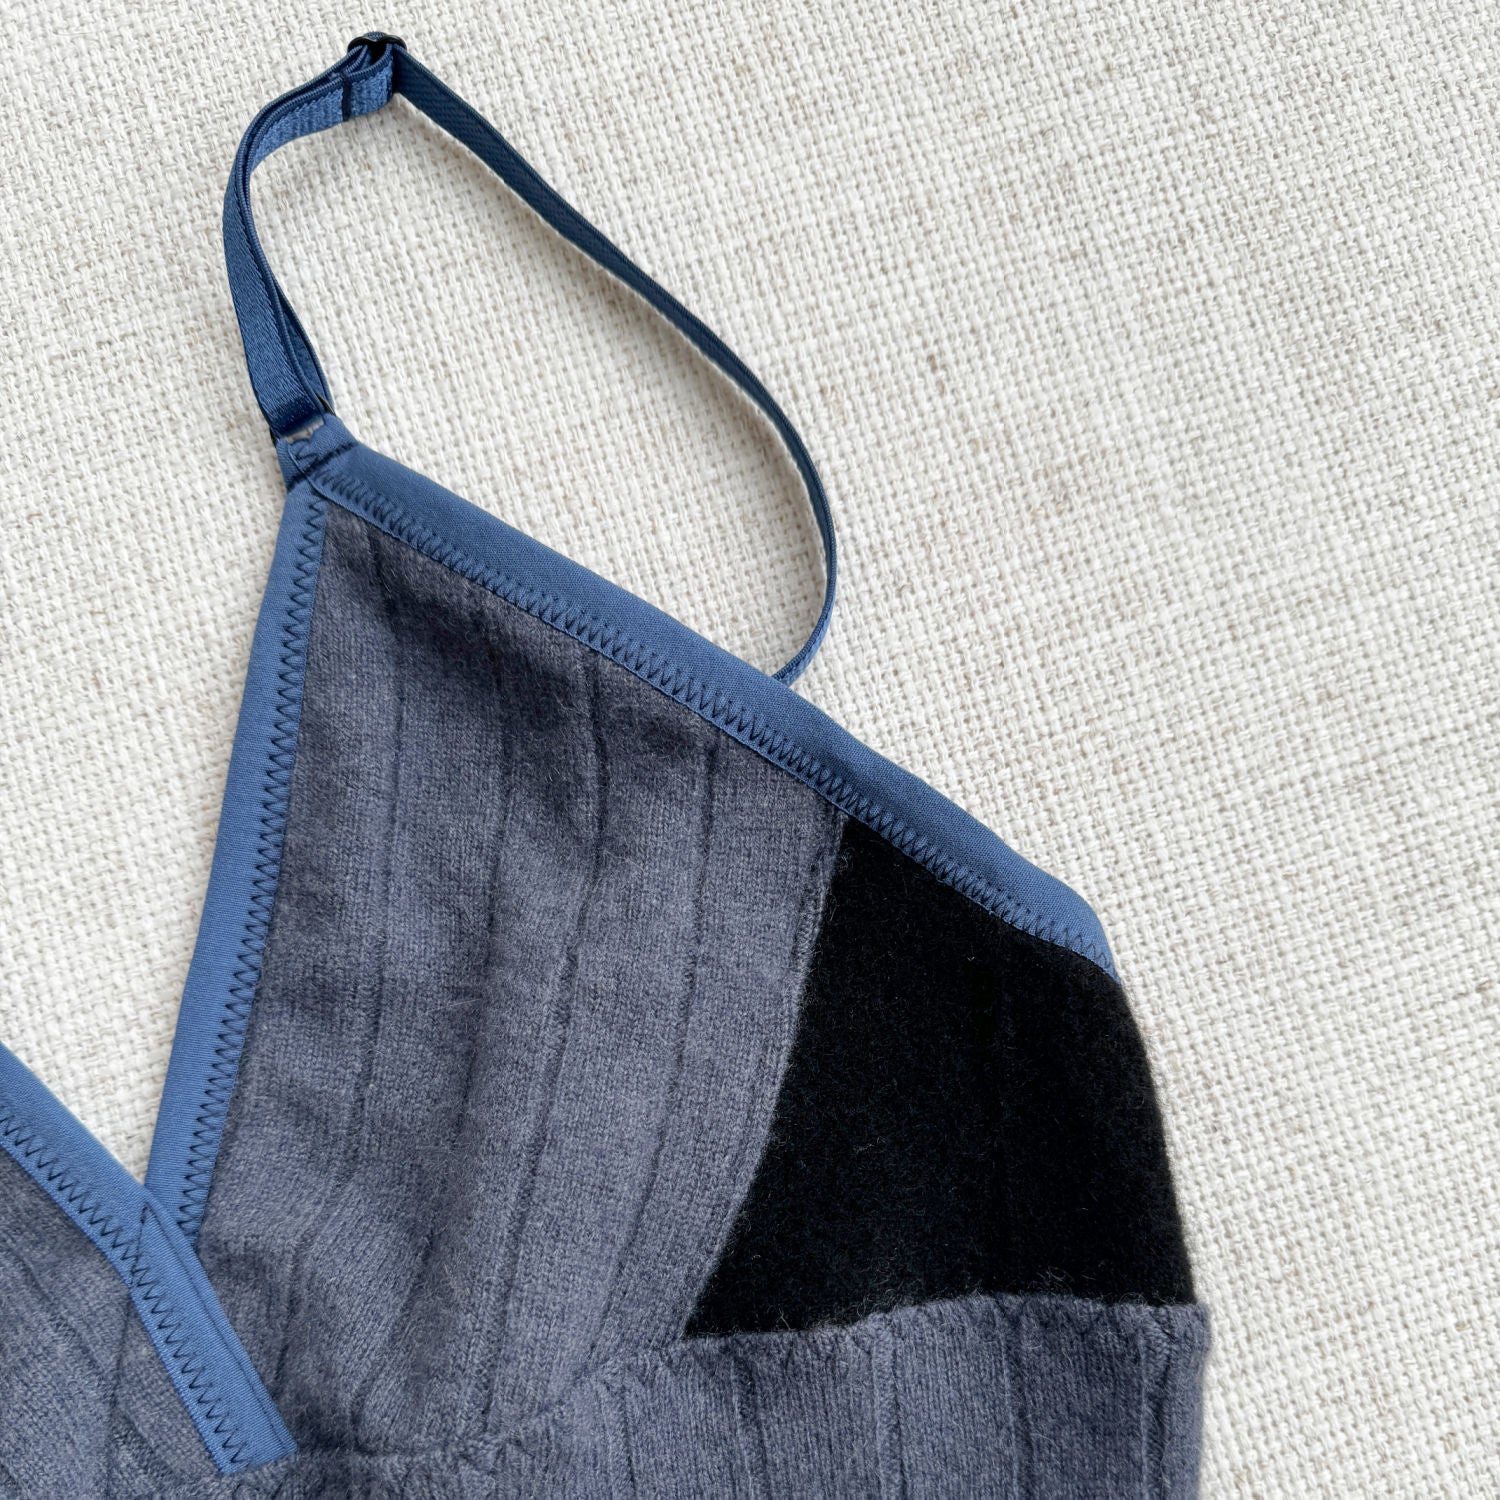 Handmade in Canada by Econica, long cashmere bra top, refined Dusty Blue and Black palette, premium cashmere material, artisanal quality, elegant and cozy, soft-to-the-touch, perfect for layering, sustainable choice, durable construction, stylish loungewear